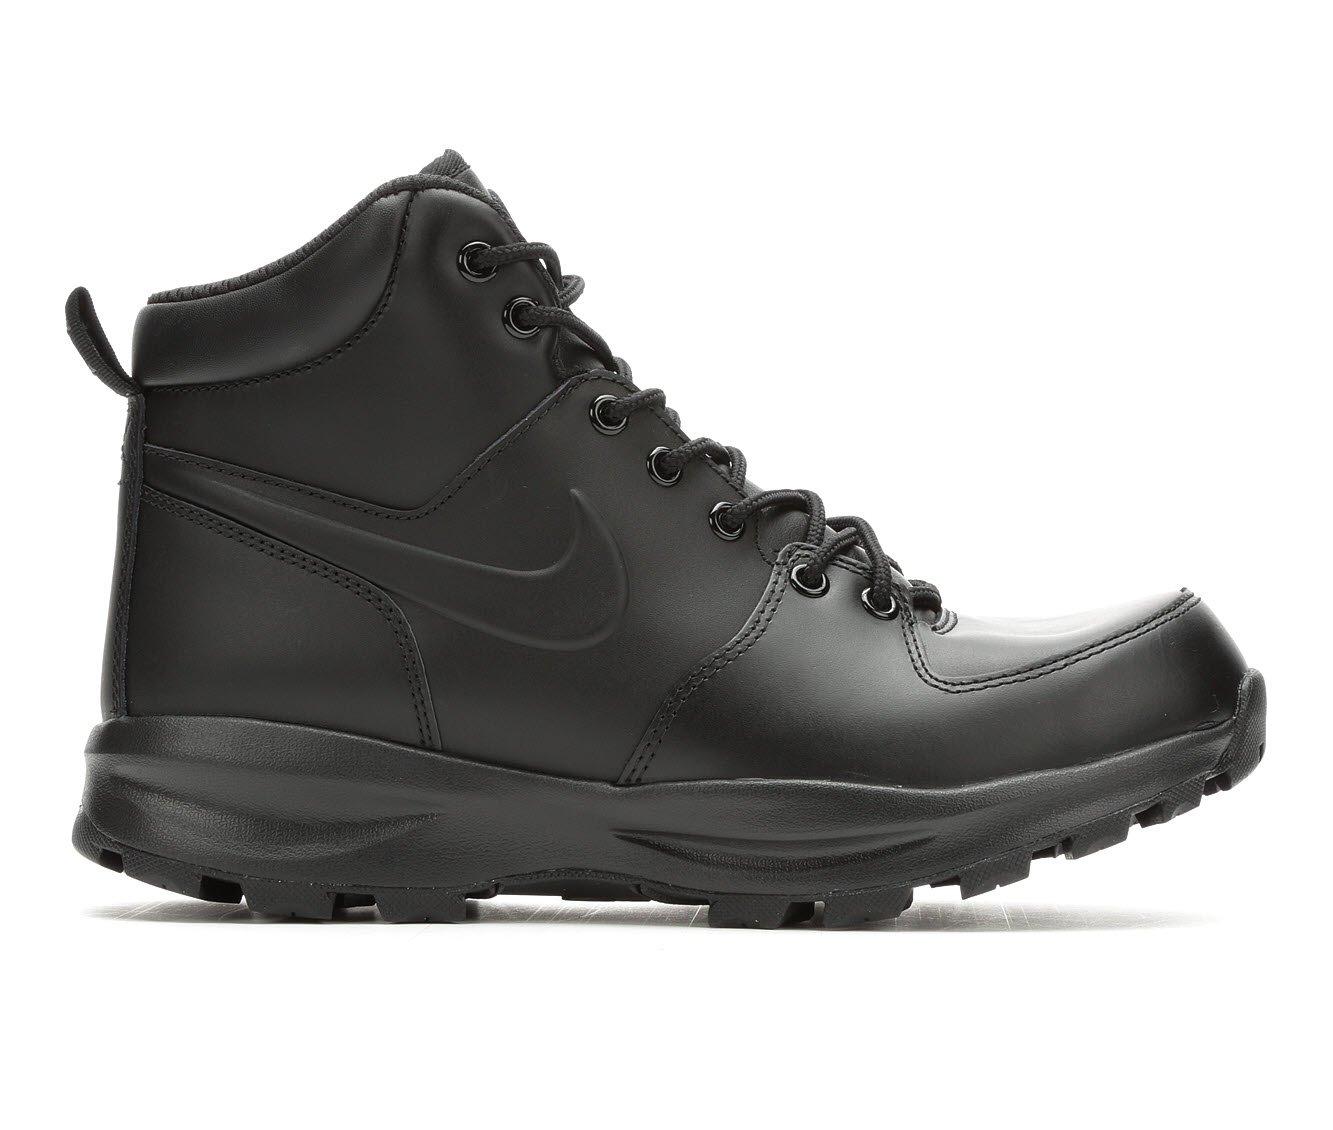 Nike Manoa Leather Men's Boots.